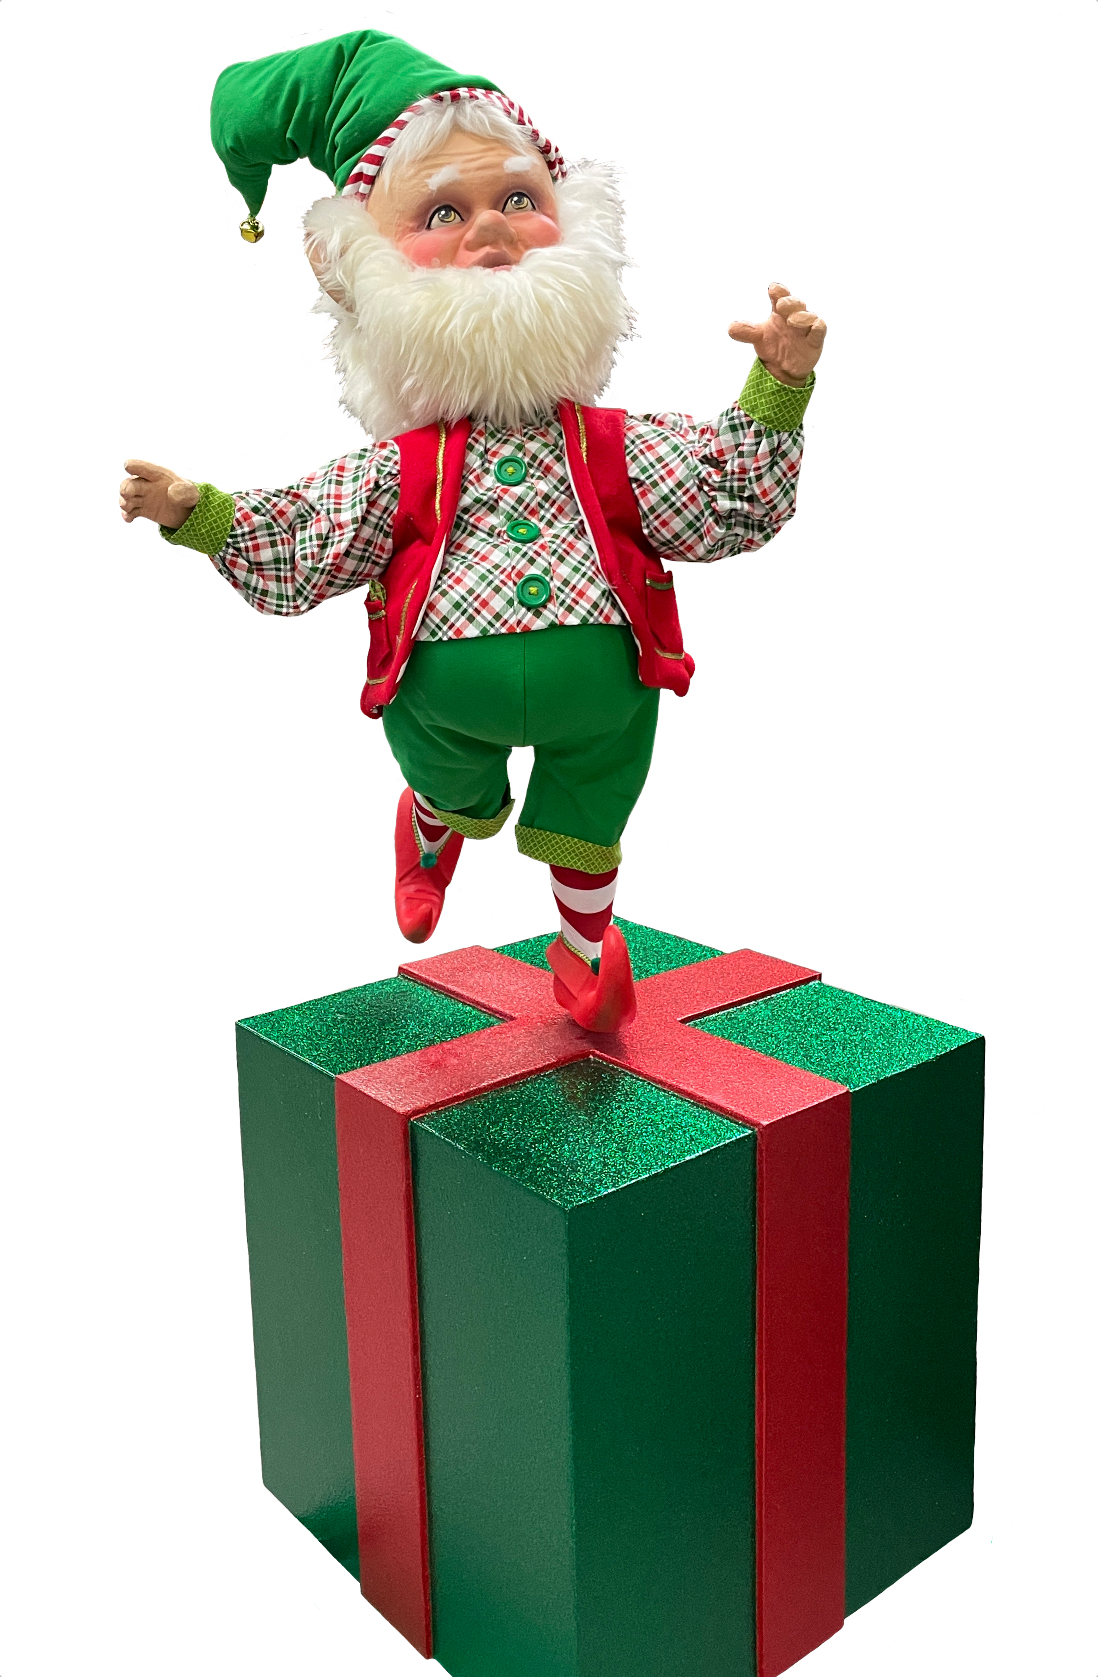 Animated Elf - dancing spinning on gift box